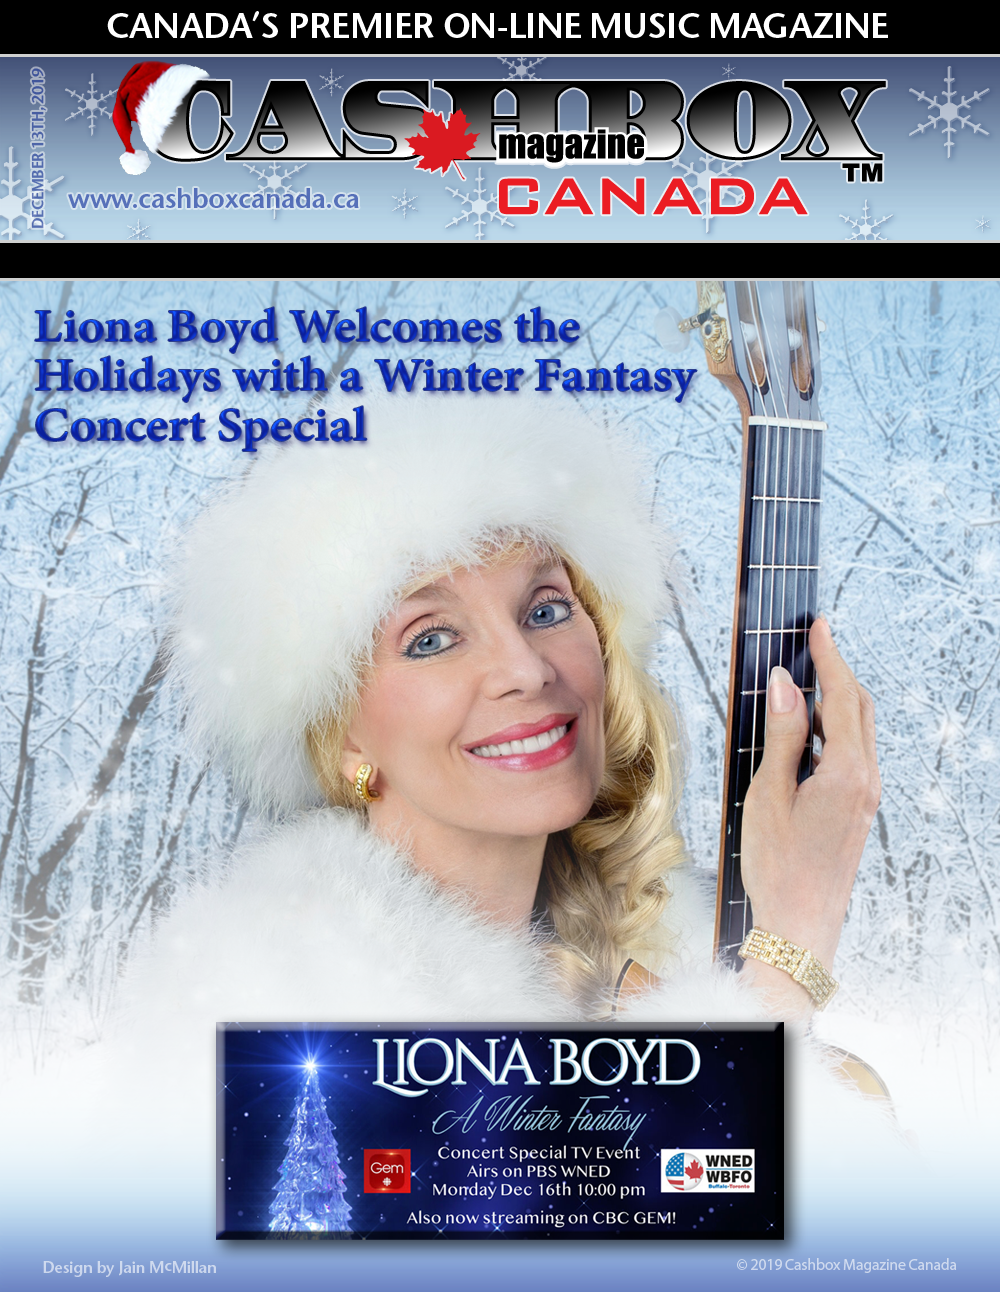 Liona Boyd Welcomes the Holidays with a Winter Fantasy Concert Special